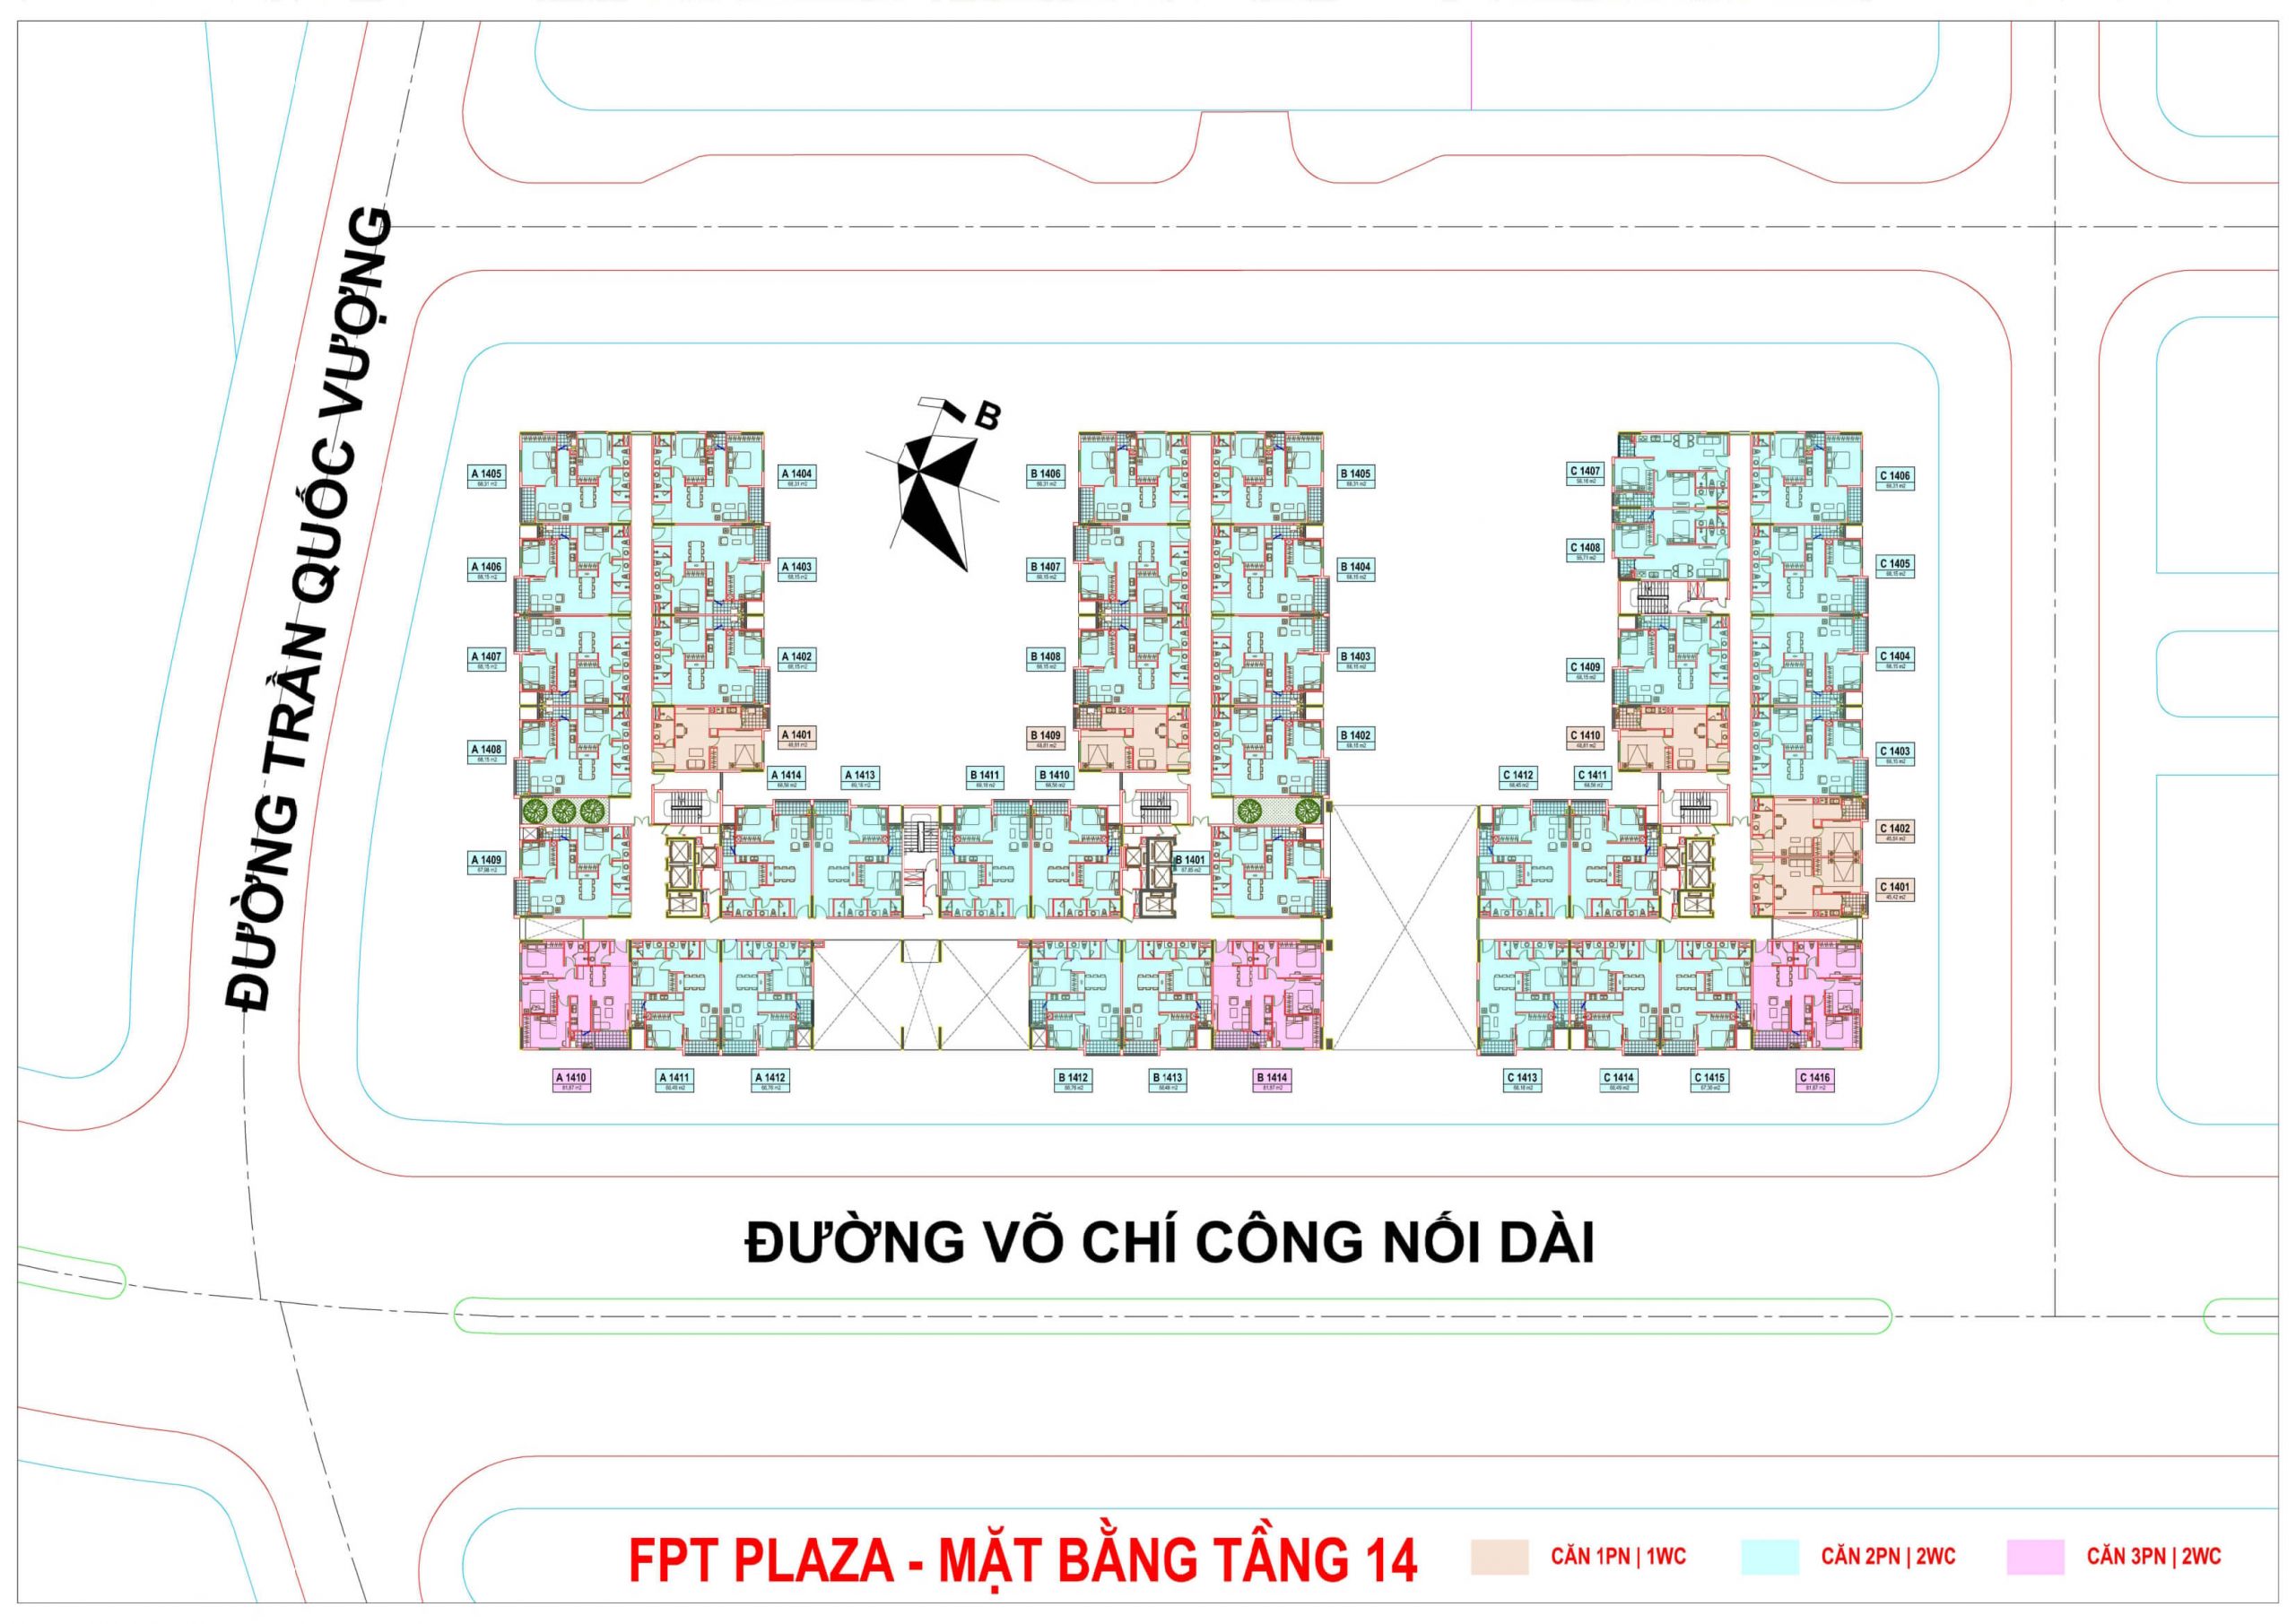 FPT PLAZA 1 Mặt bằng tầng 14